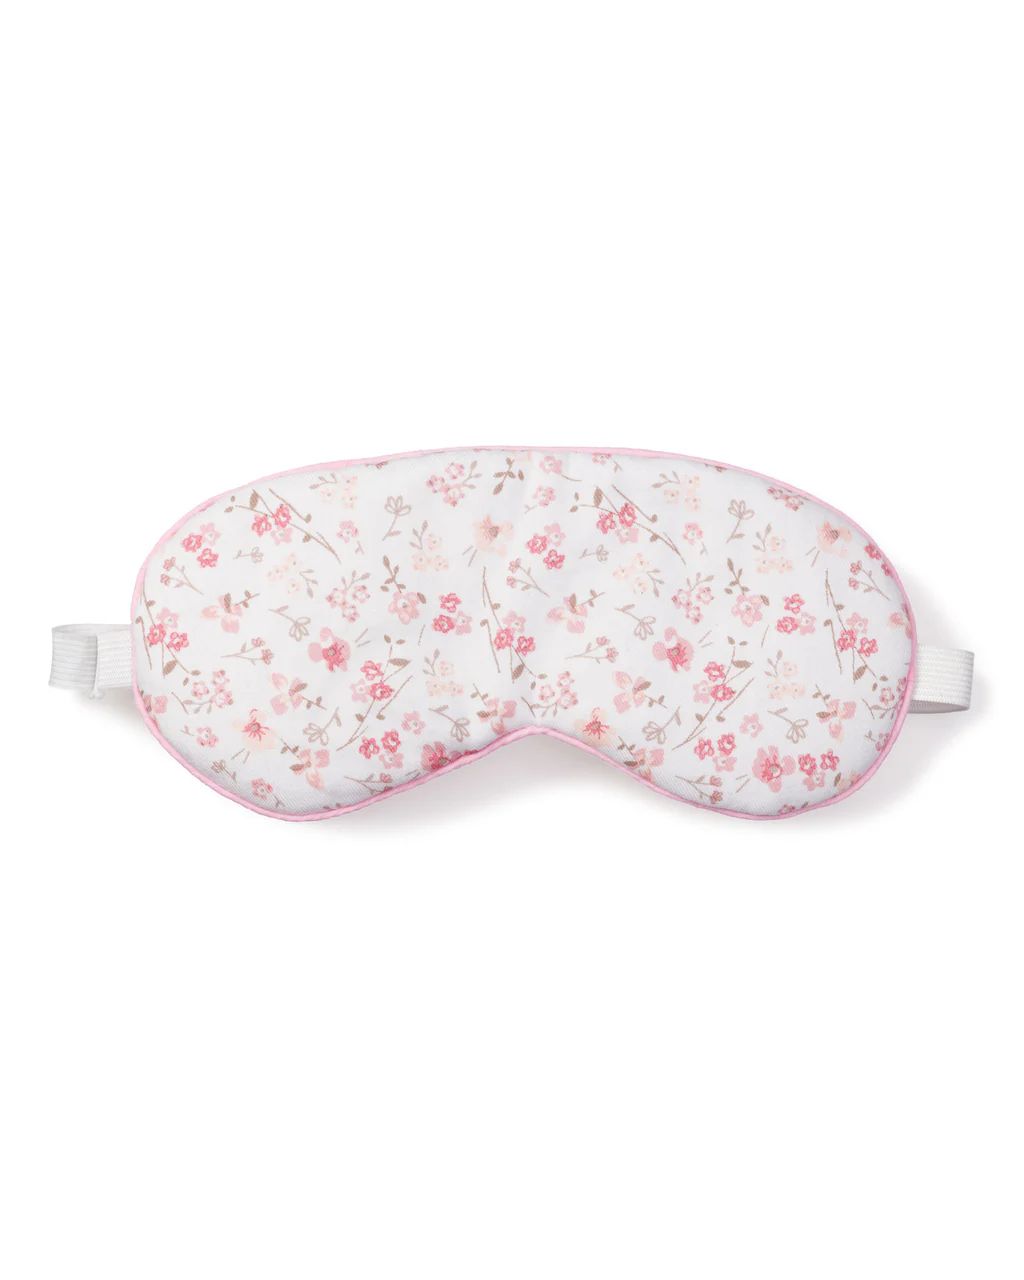 Adult's Sleep Mask in Dorset Floral | Petite Plume